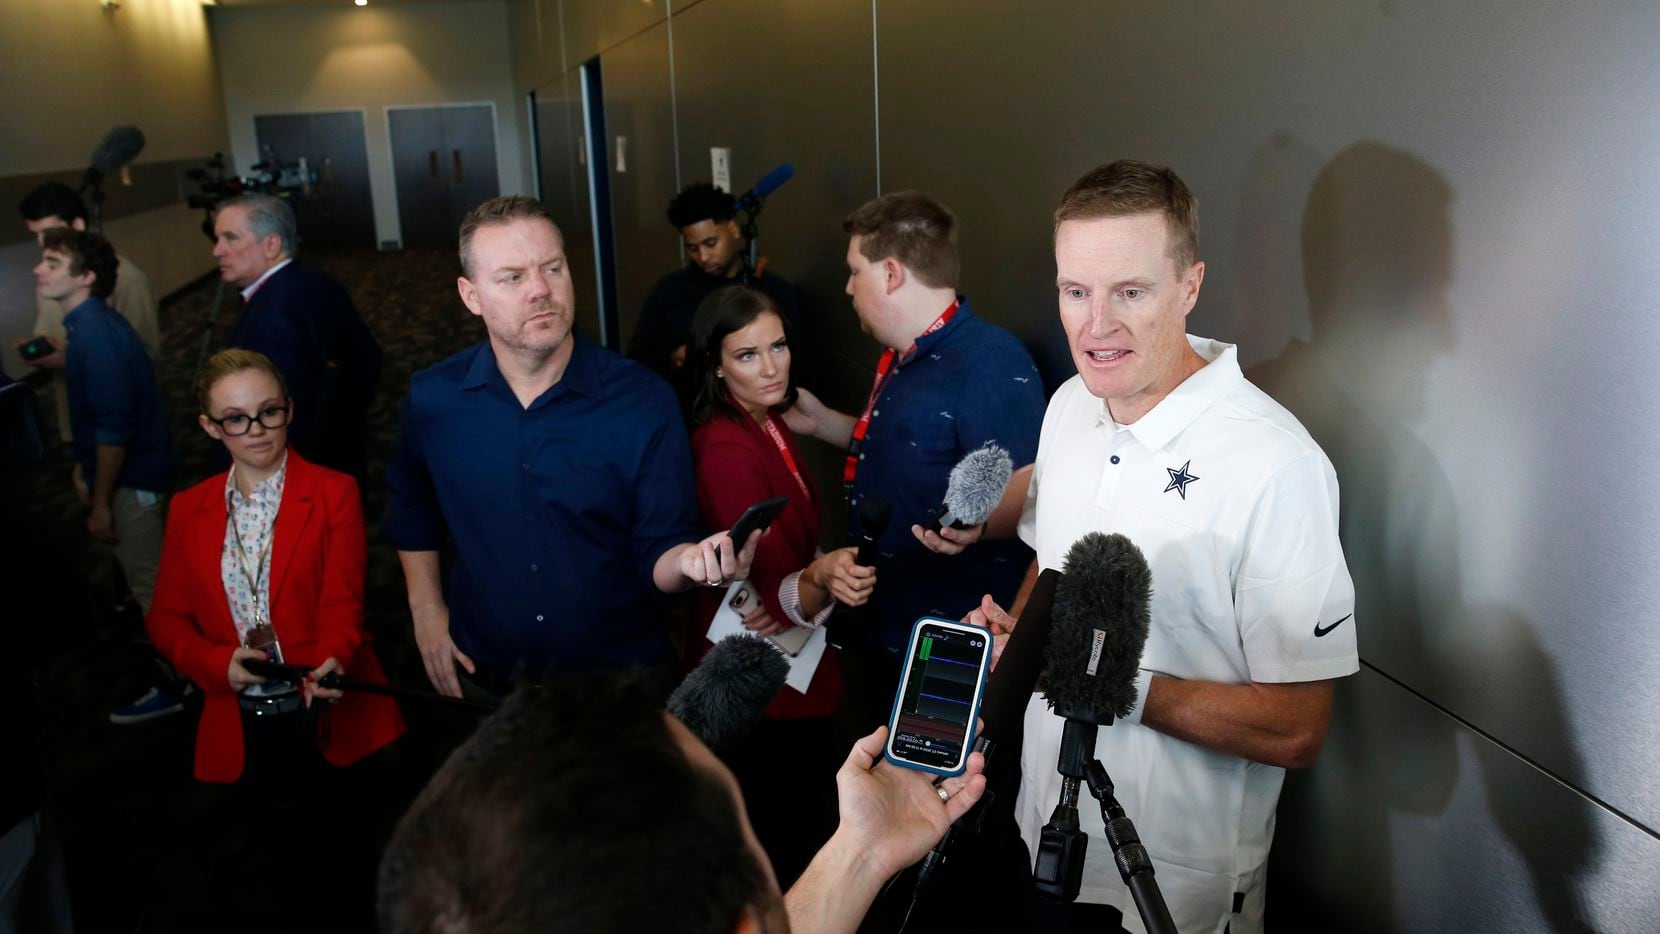 Dallas Cowboys special teams coach John Fassel answers questions from the media at The Dallas Cowboys headquarters at The Star in Frisco on Monday, January 27, 2020.